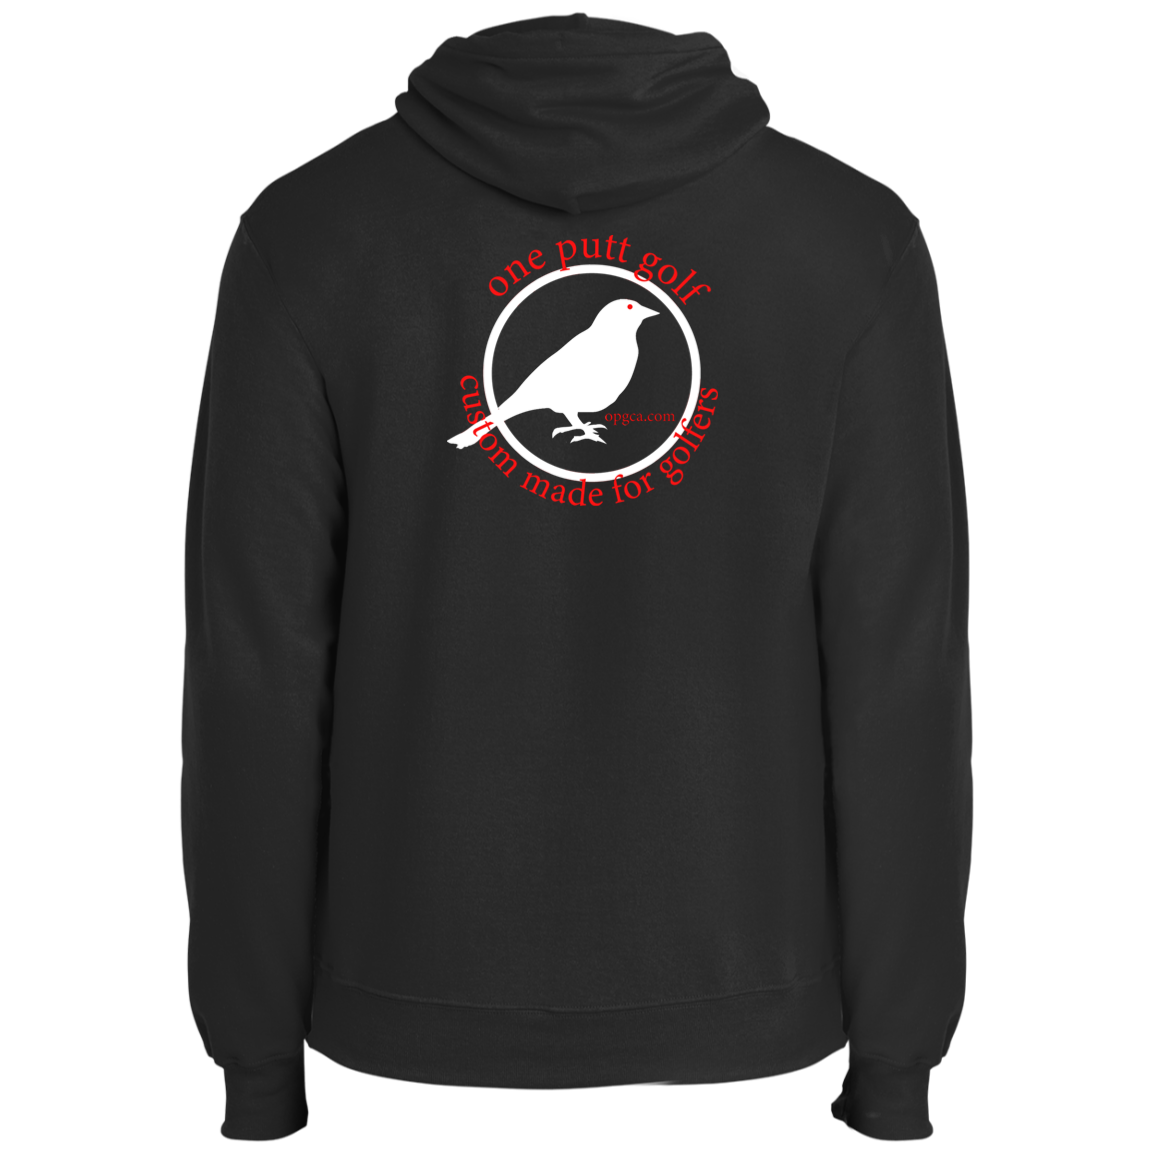 OPG Custom Design # 24. Ornithologist. A person who studies or is an expert on birds. Fleece Pullover Hoodie